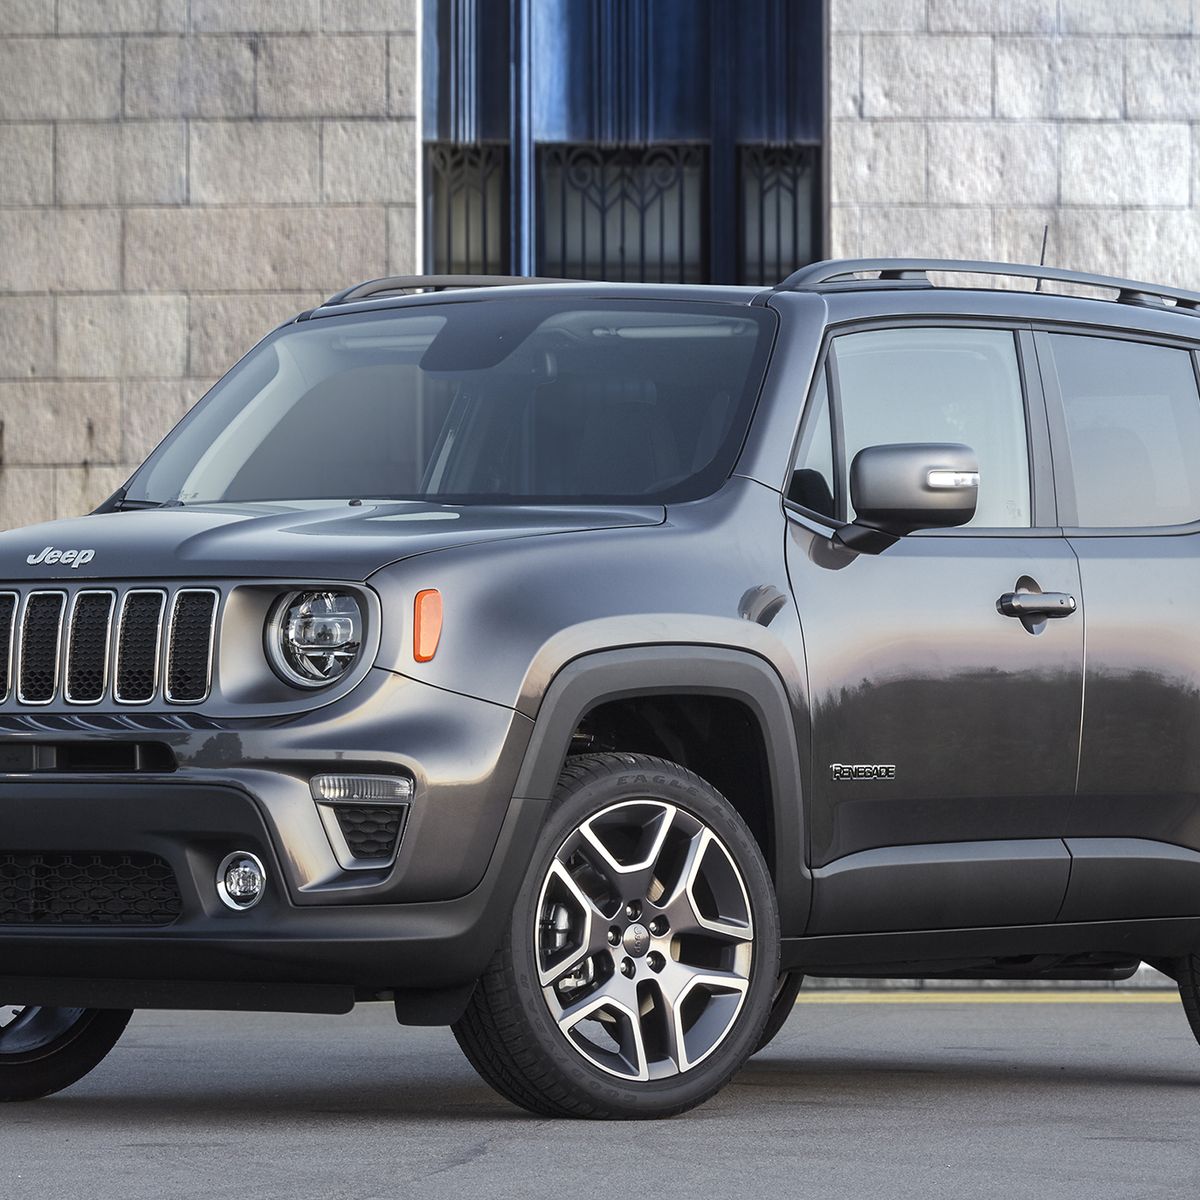 Jeep Renegade Plug-In Hybrid Is Coming in 2020